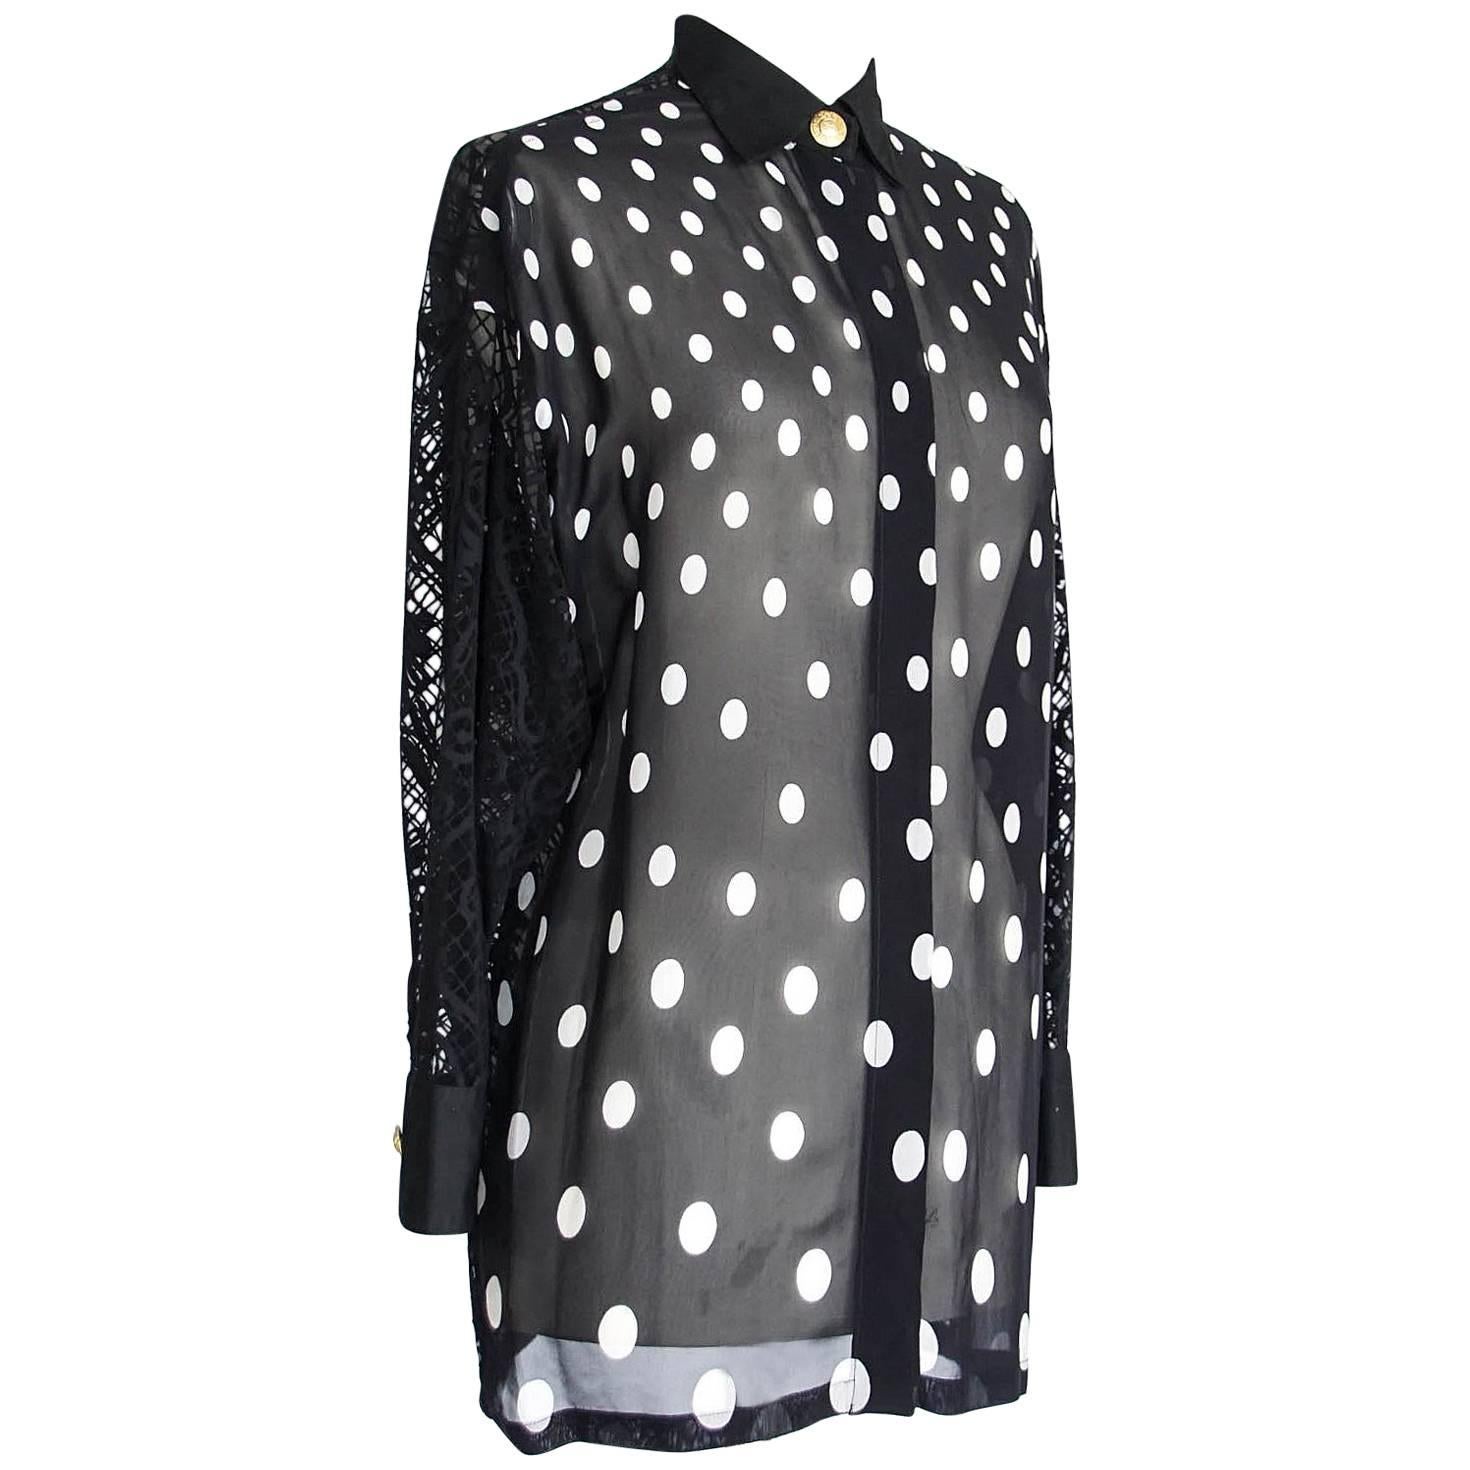 Gianni Versace Couture Top Black and White Polka Dot Lace Back  38 / 4